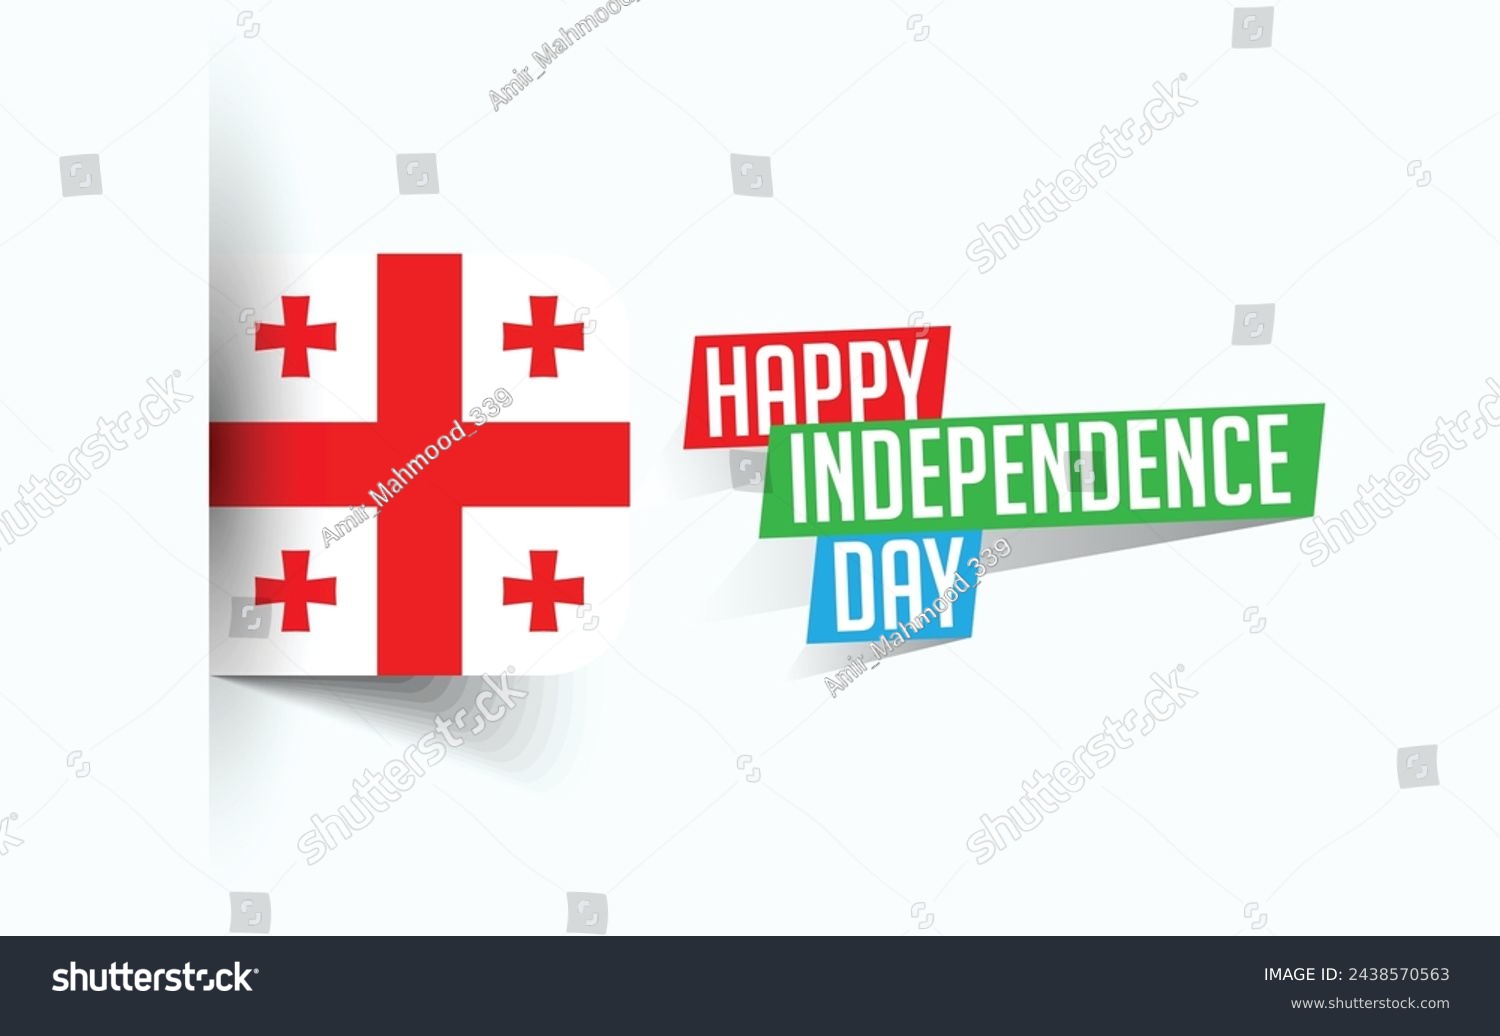 SVG of Happy Independence Day of Georgia Vector illustration, national day poster, greeting template design, EPS Source File
 svg